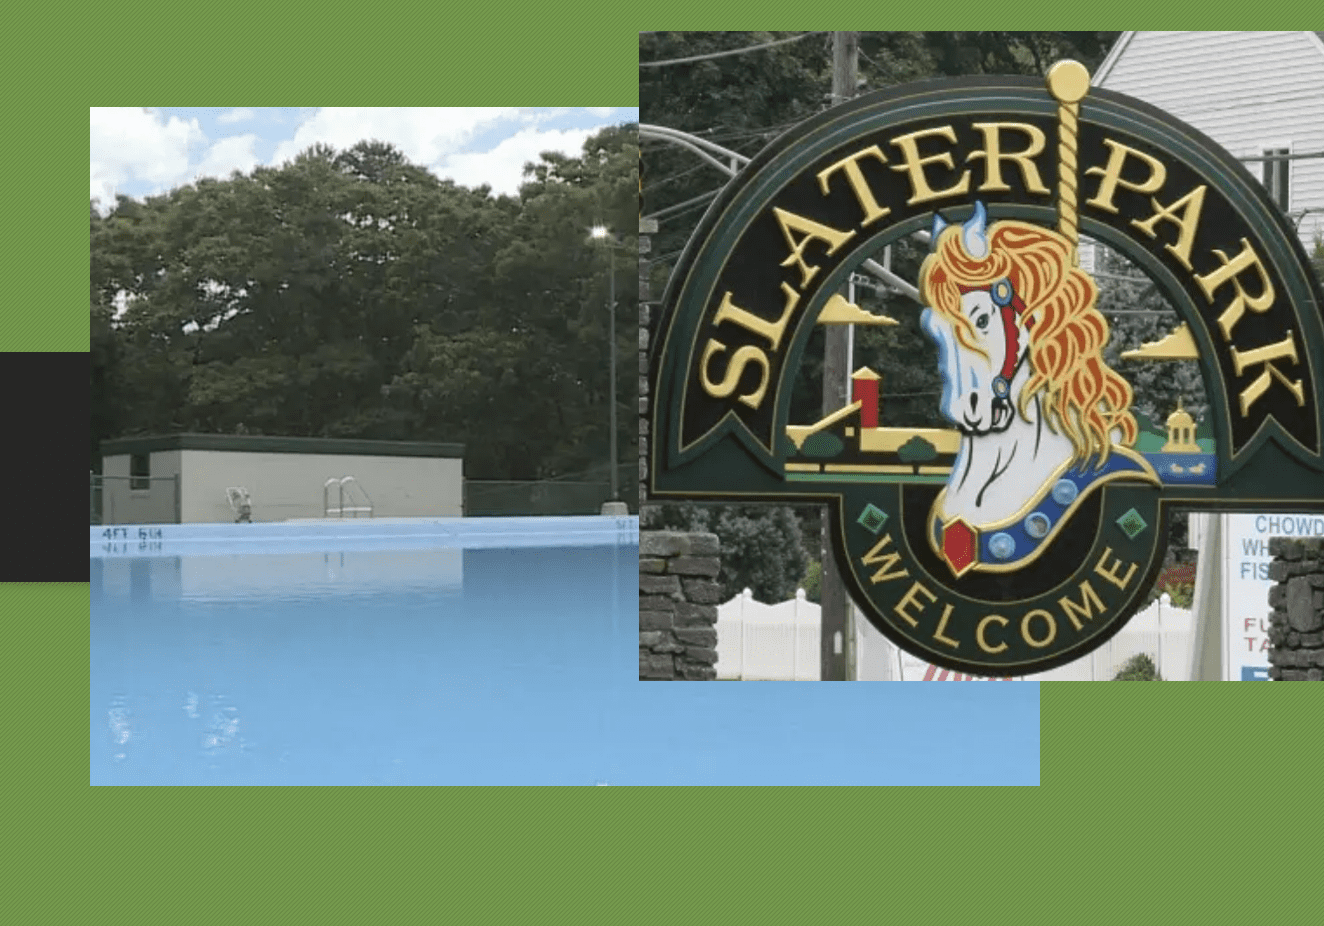 A sign for slater park with a pool in the background.